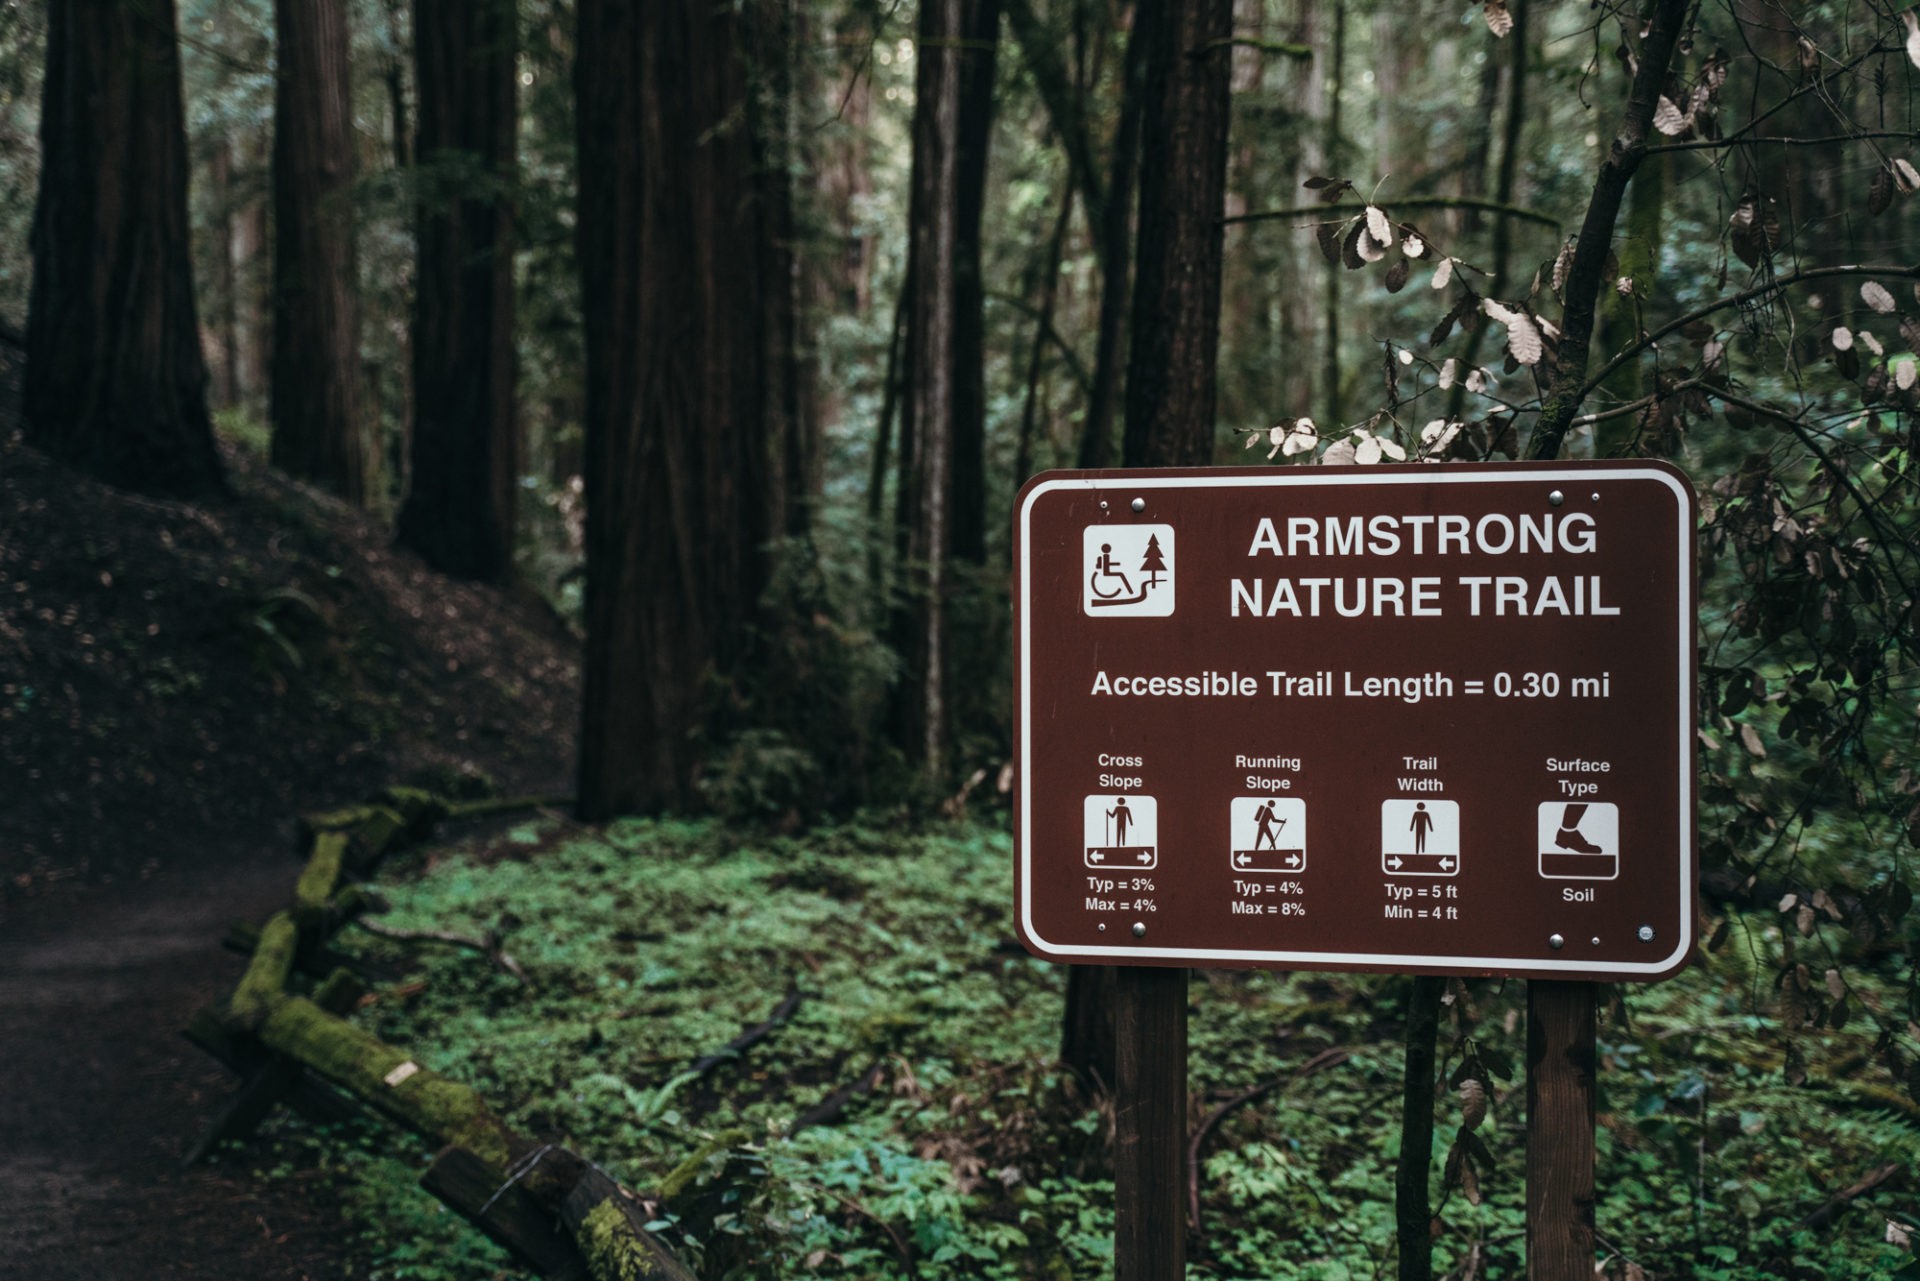 Armstrong Nature Trail at at the Armstrong Redwoods Reserve, things to do in sonoma